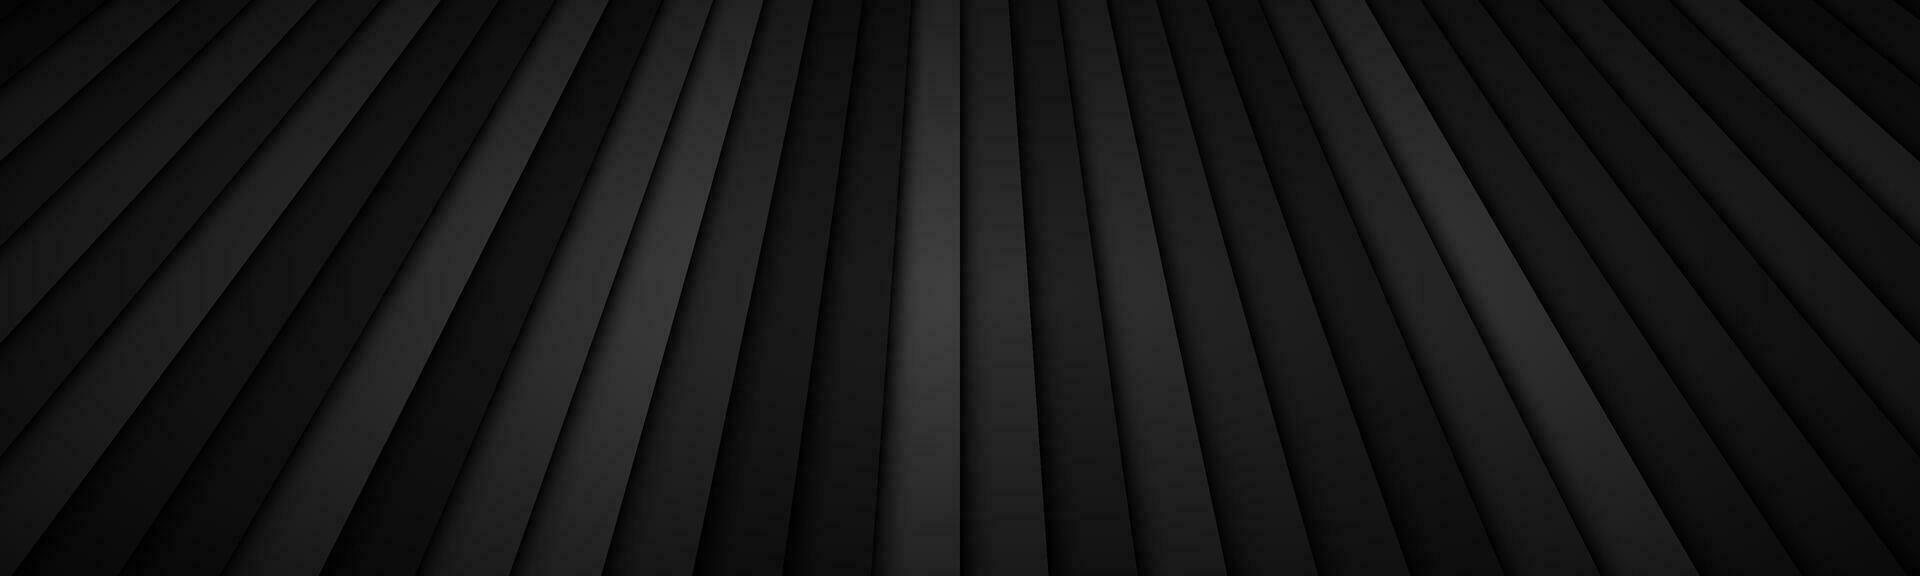 Abstract stripe header with different transparencies. Black metallic geometric background with dark gradient. Simple banner vector